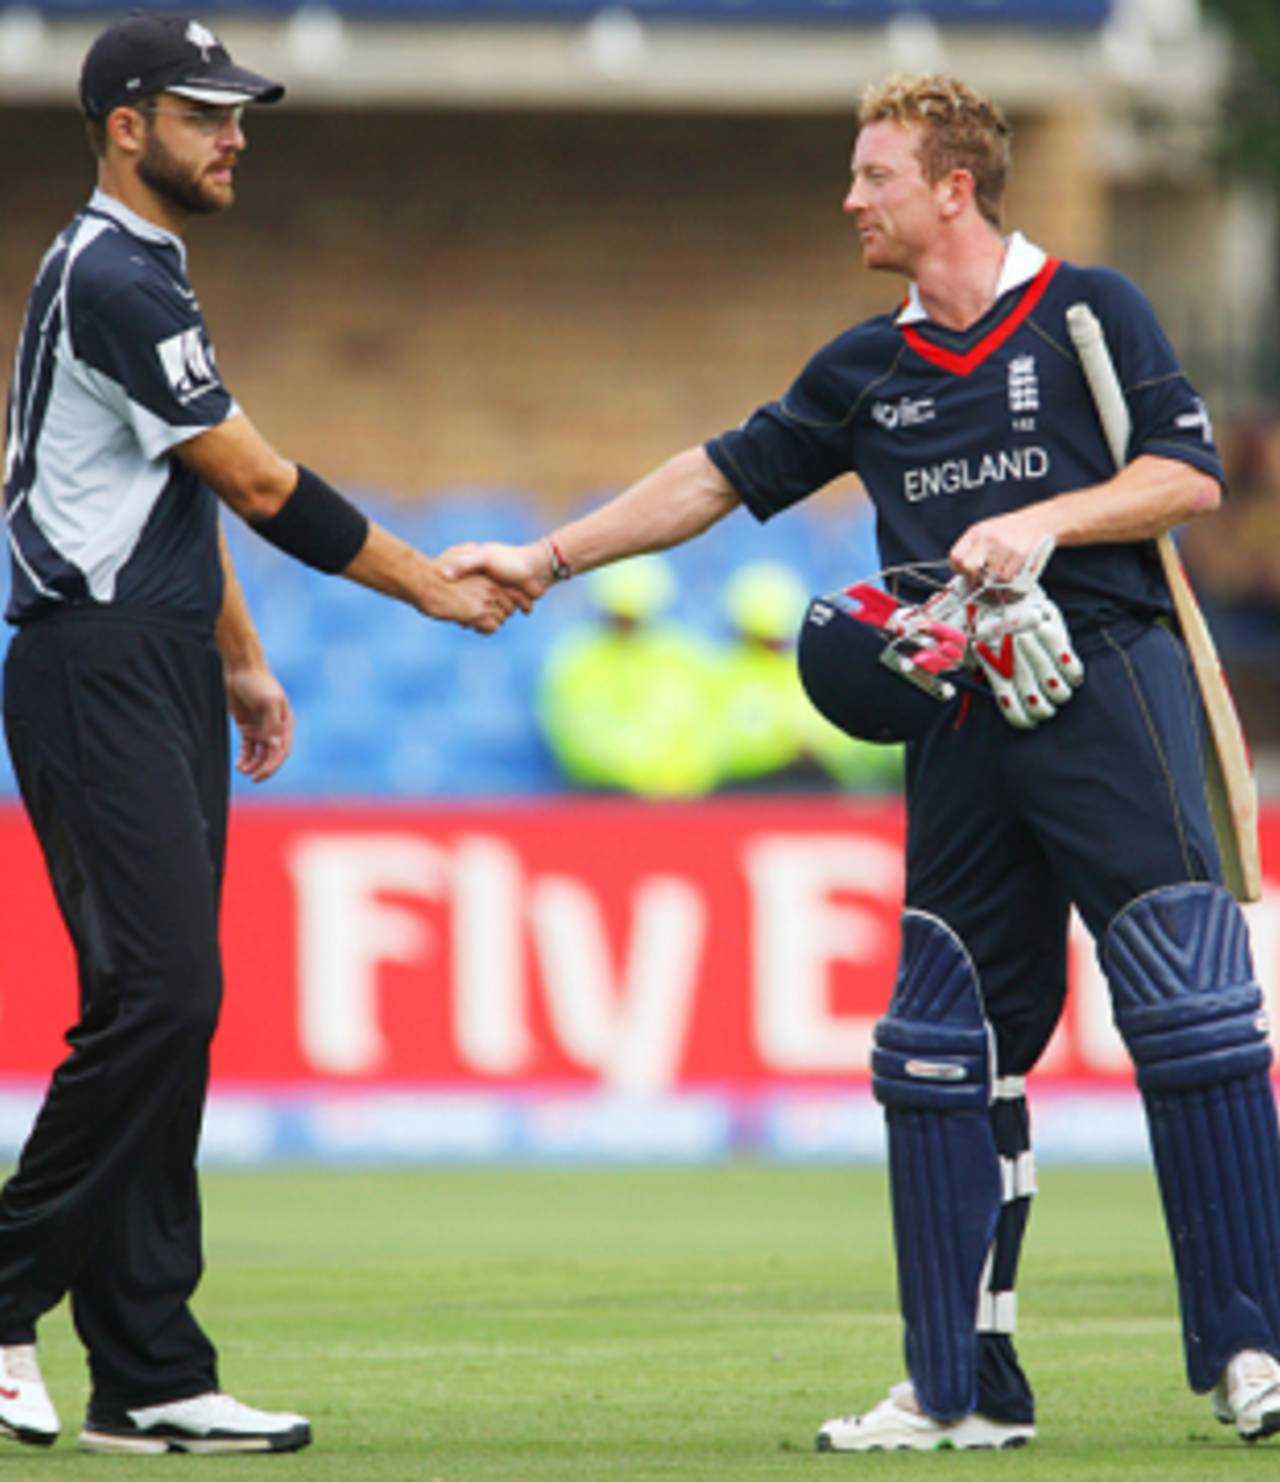 Daniel Vettori and Paul Collingwood reach an amicable solution, England v New Zealand, ICC Champions Trophy, Group B, Johannesburg, September 29, 2009